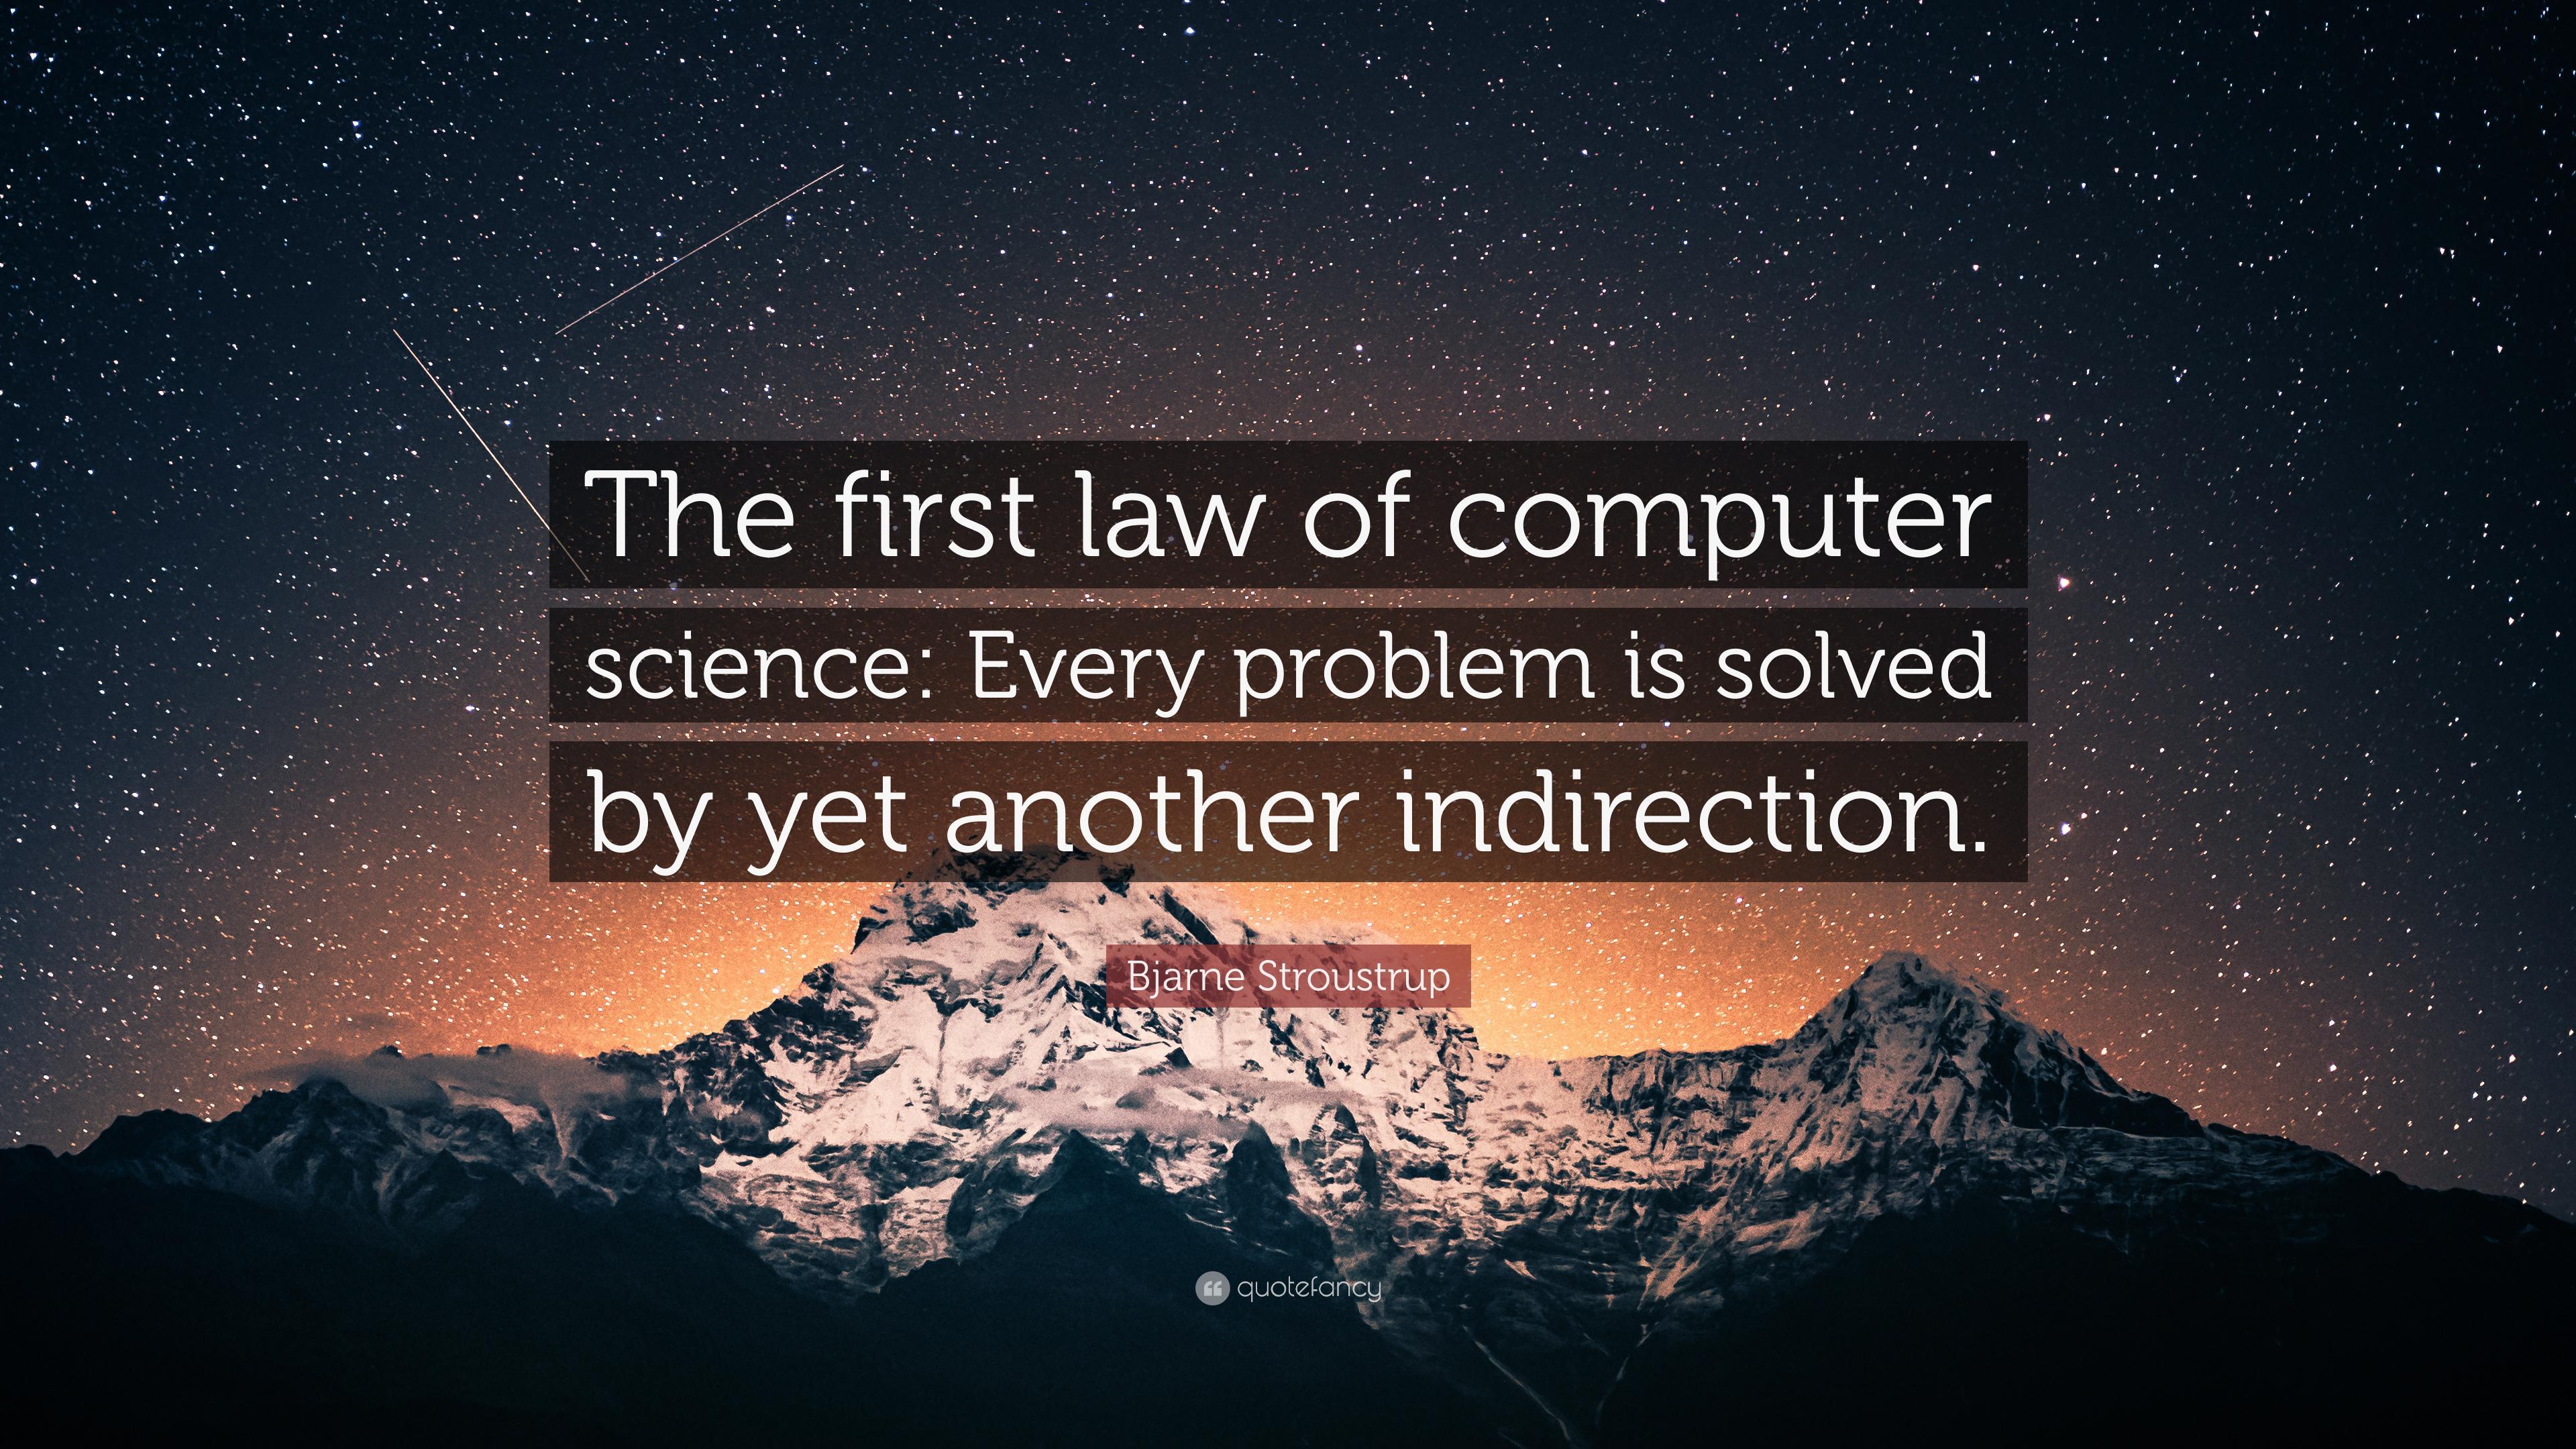 Bjarne Stroustrup Quote: “The first law of computer science